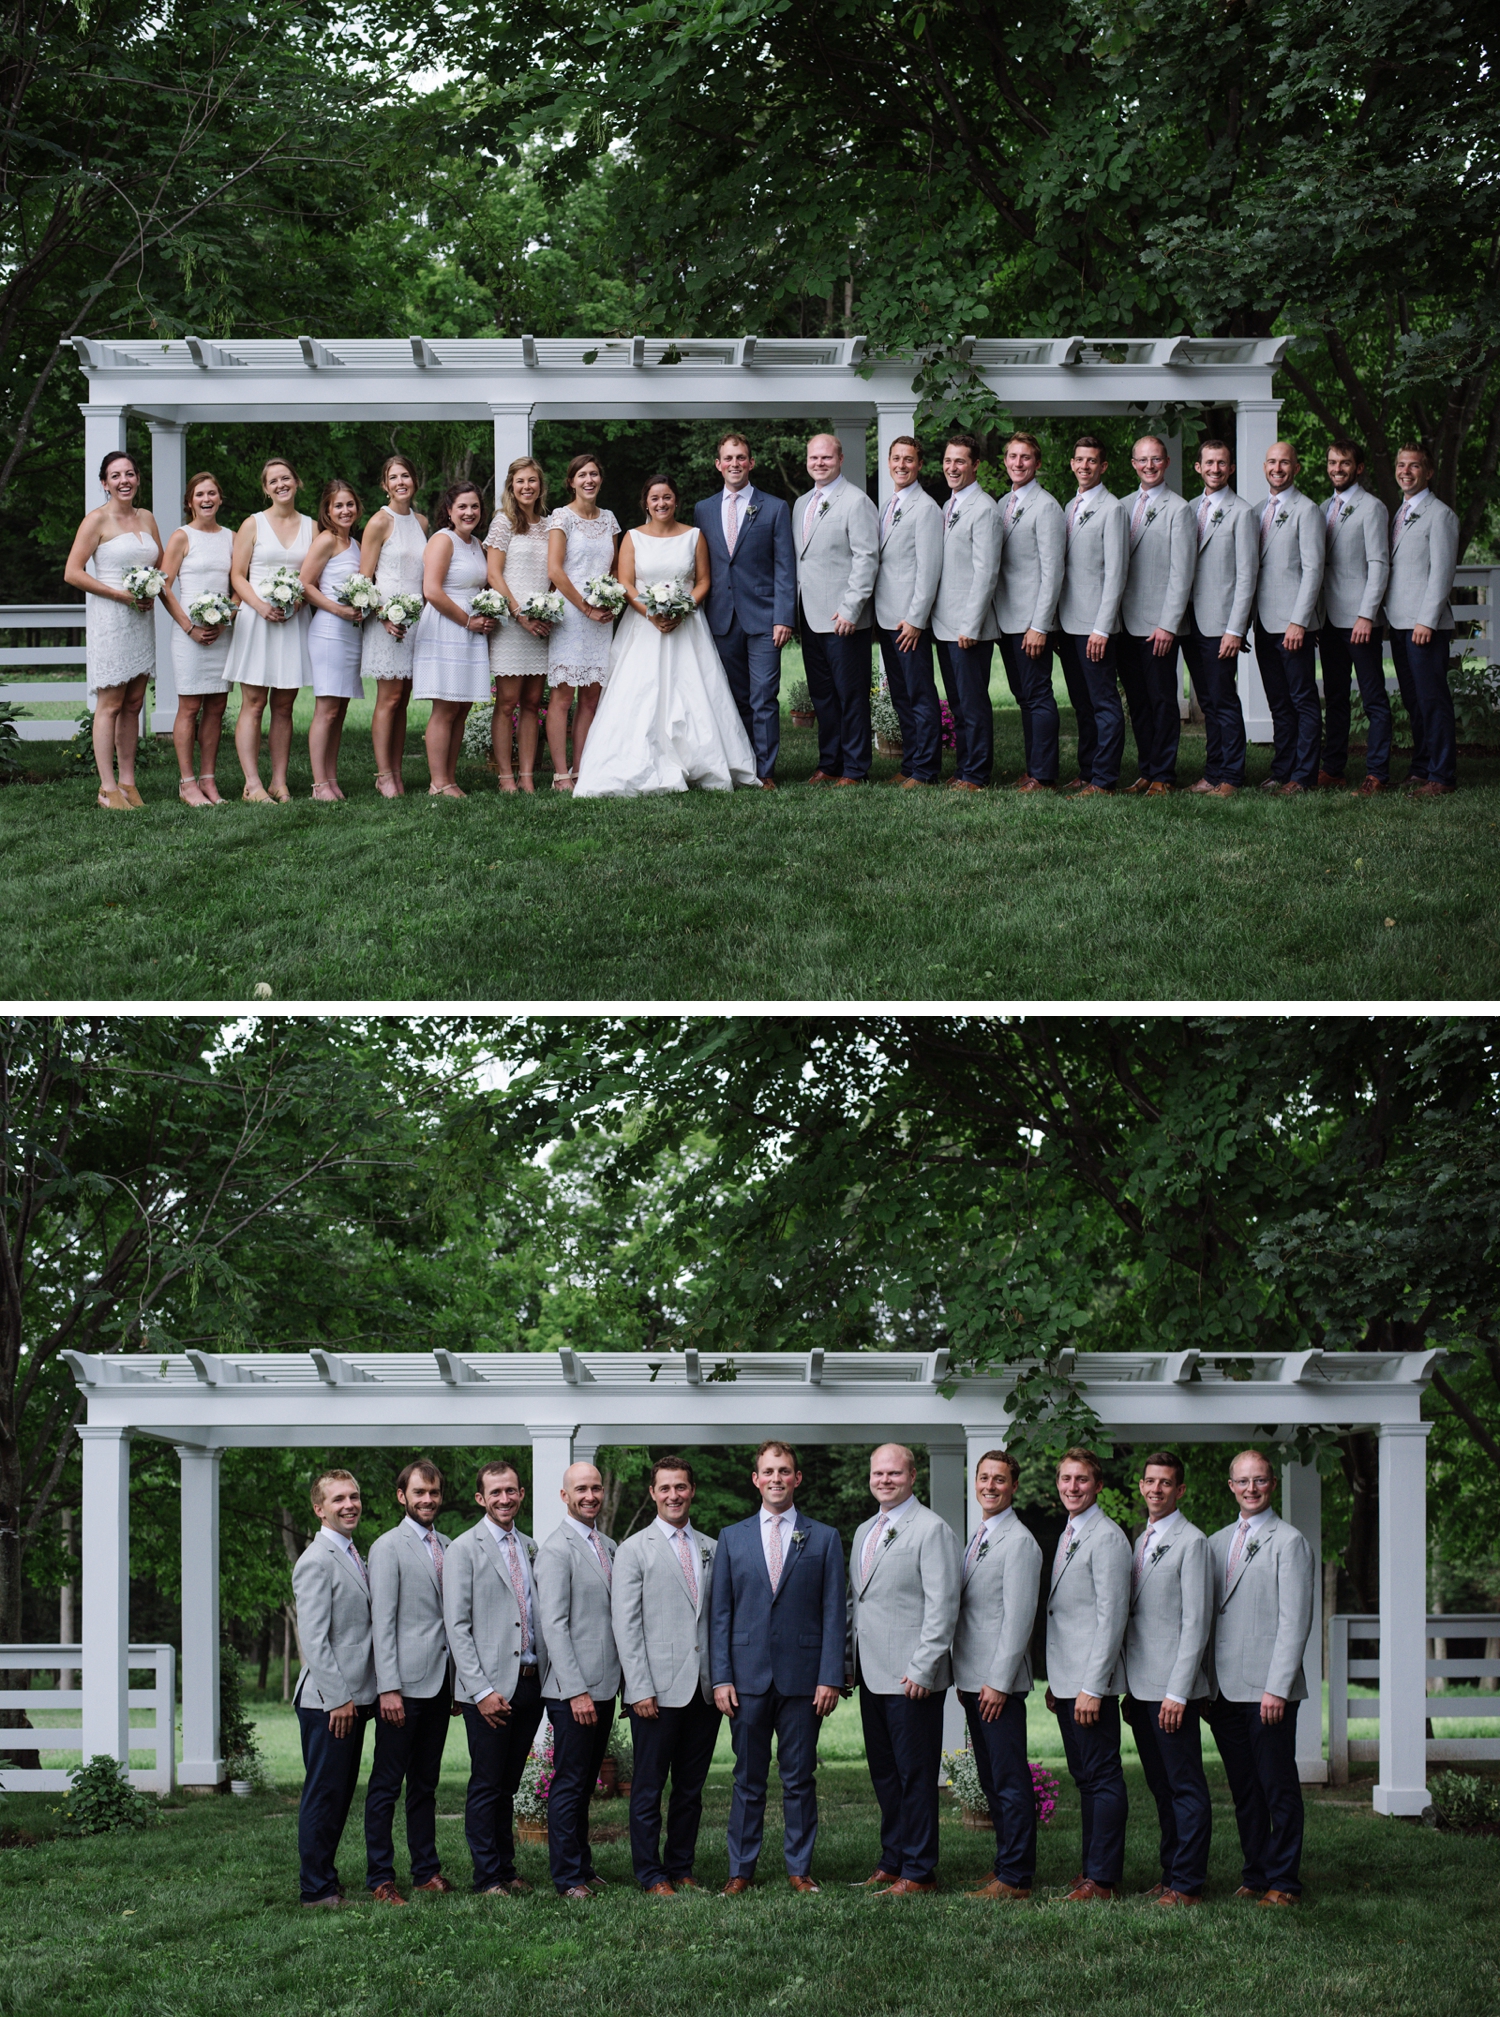 Wedding party in navy, gray and white